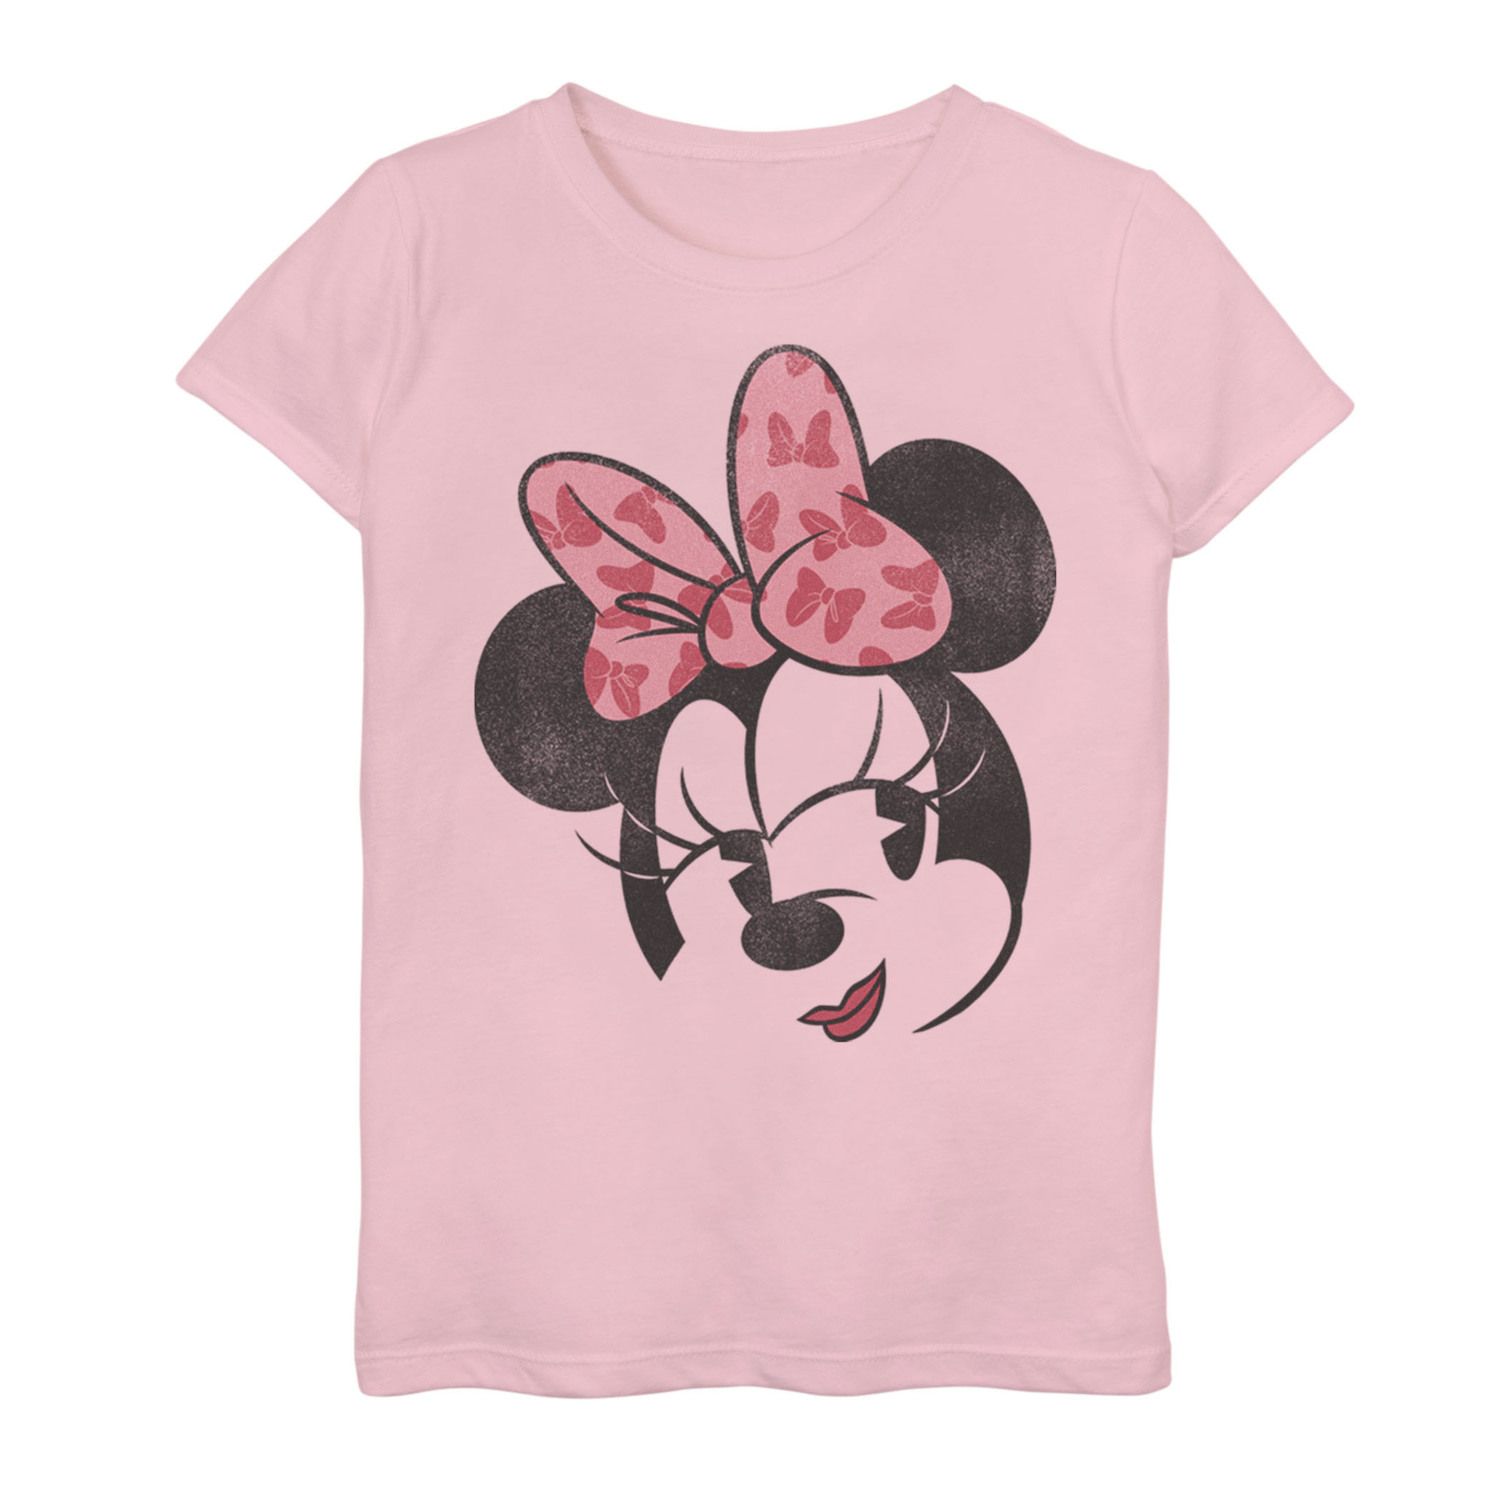 Image for Disney 's Mickey And Friends Girls 7-16 Minnie Mouse Stylized Portrait Graphic Tee at Kohl's.